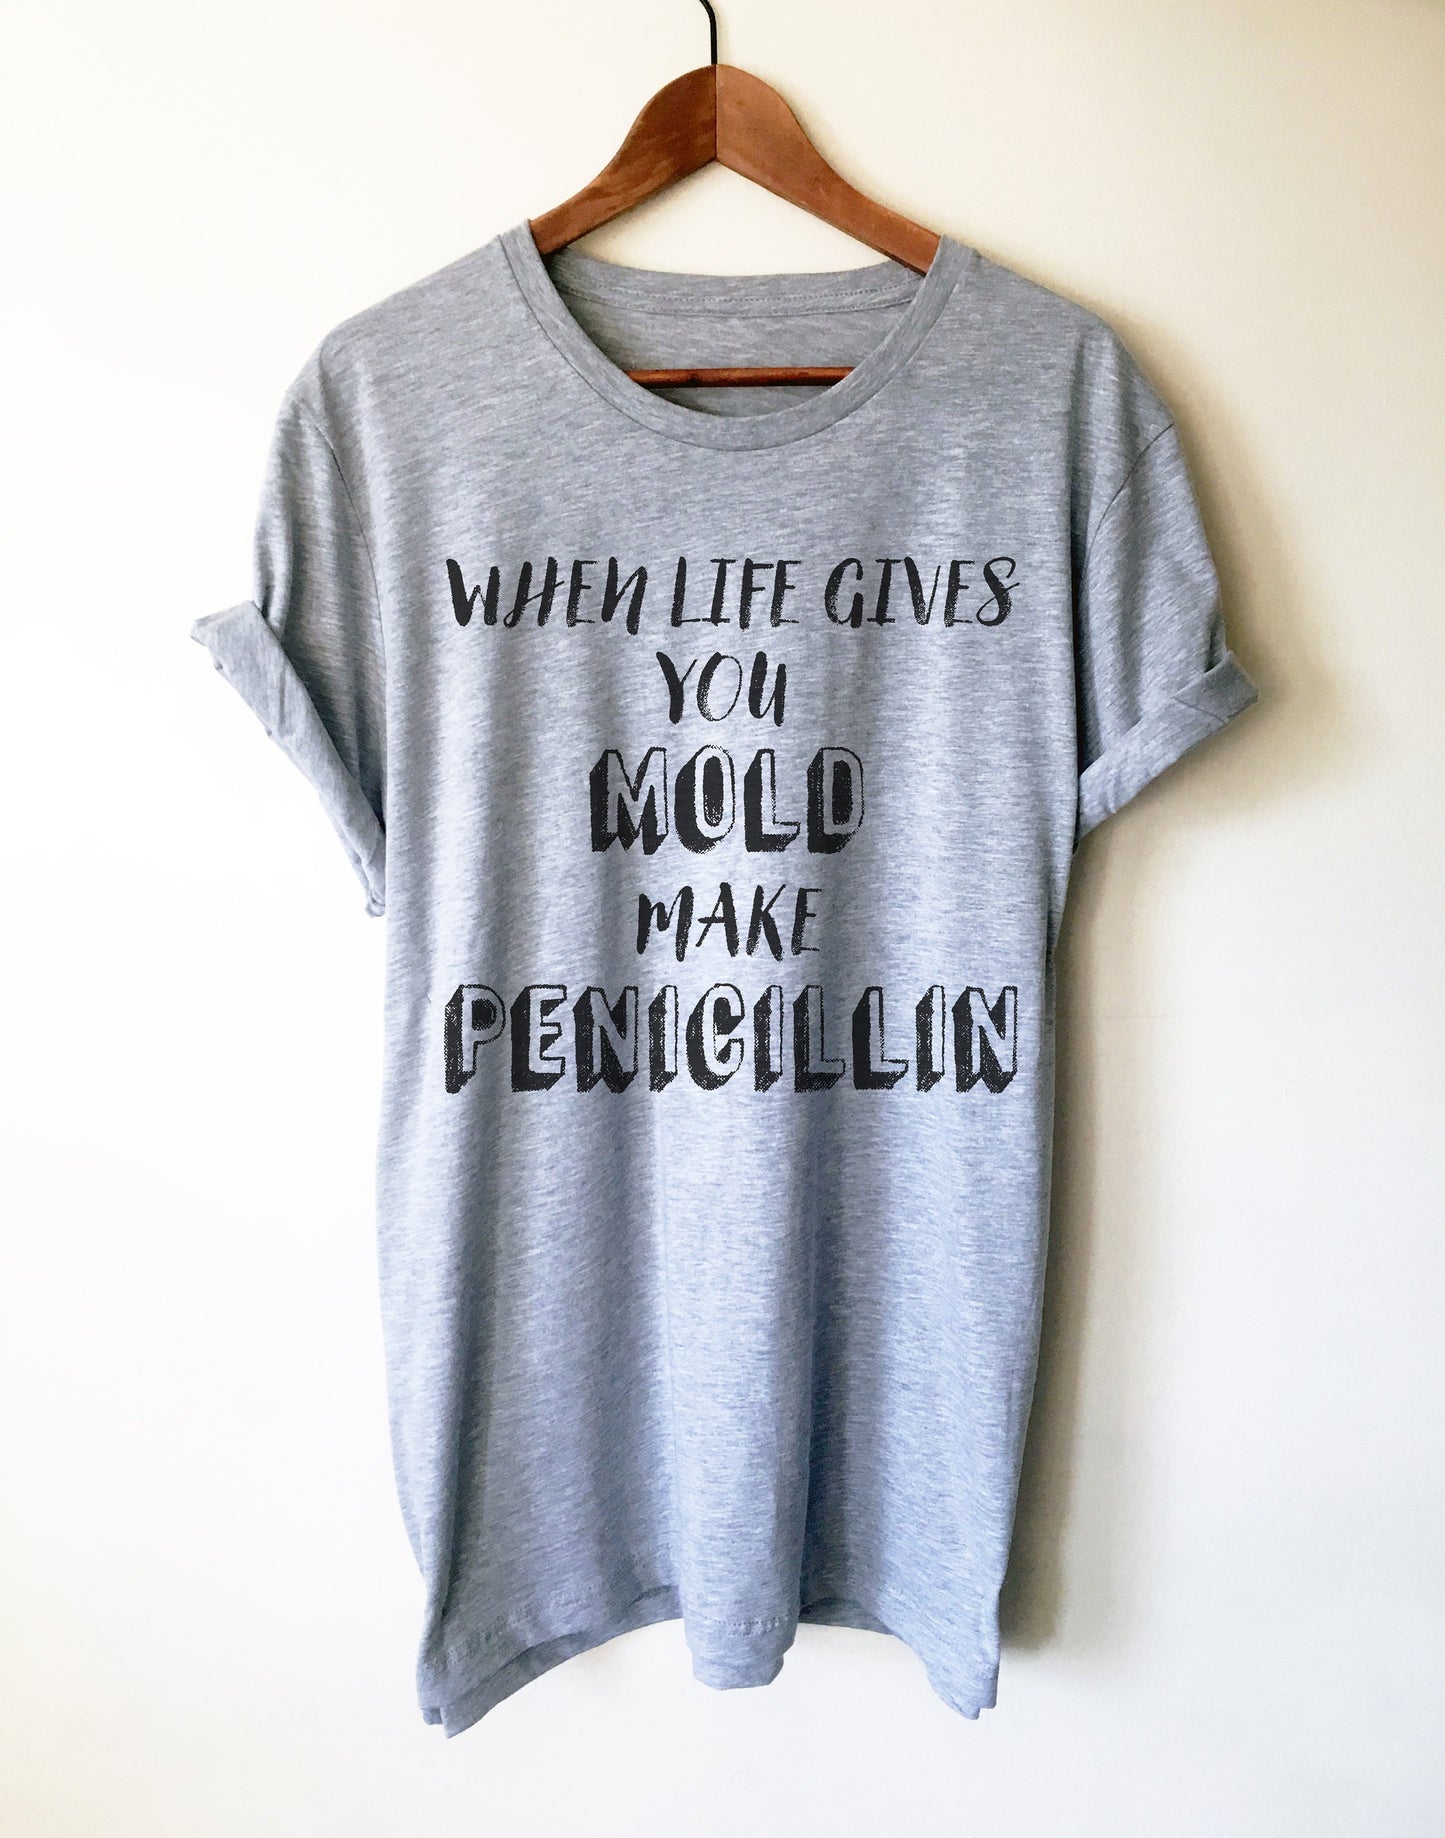 When Life Gives You Mold Make Penicillin Unisex Shirt - Microbiologist Shirt, Microbiology Gift, Medical School Gift, Chemist Shirt, Science